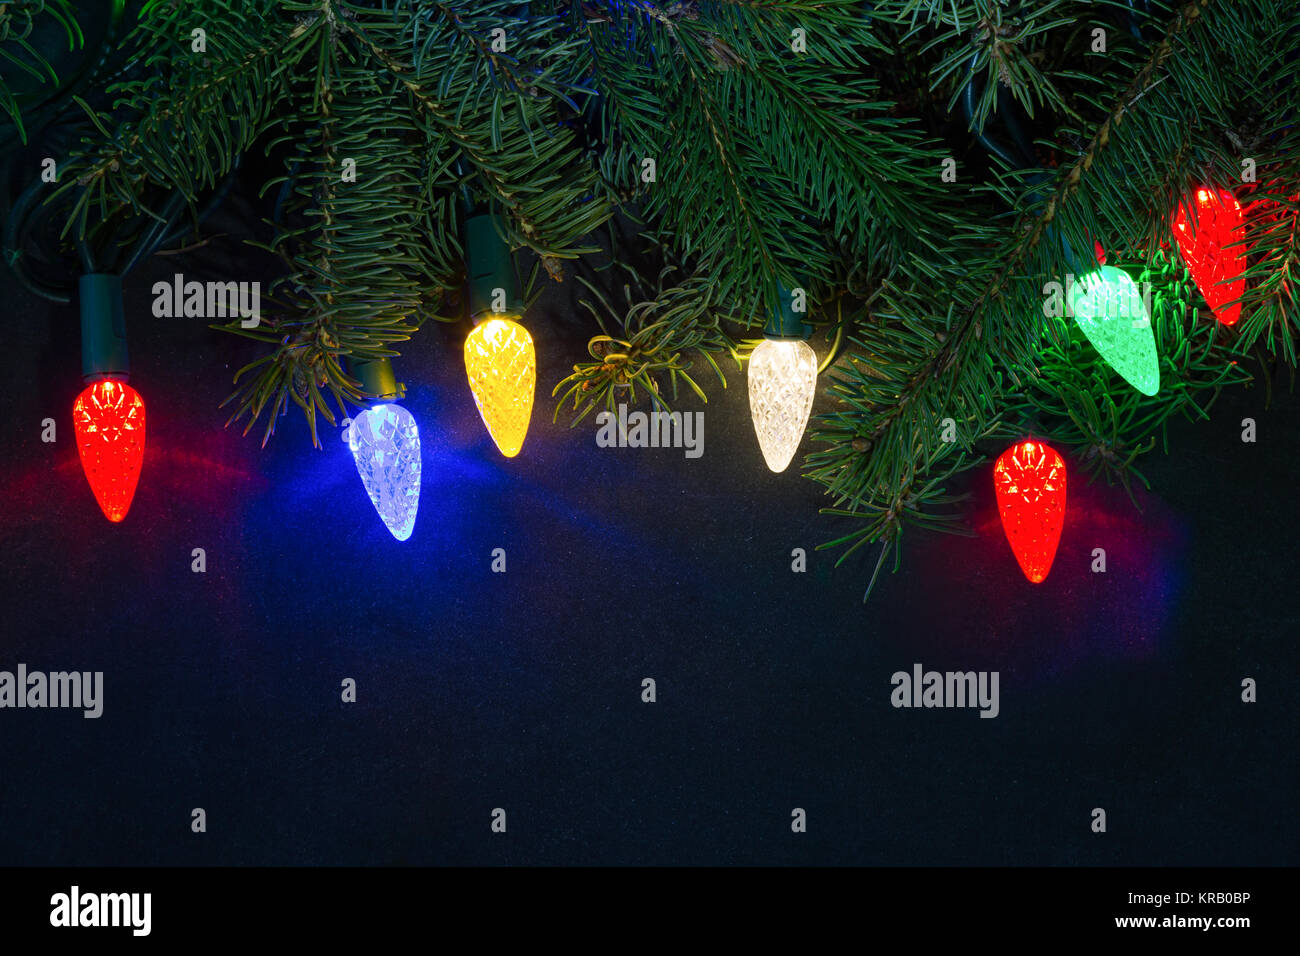 Christmas lights and evergreens against a dark background. Stock Photo